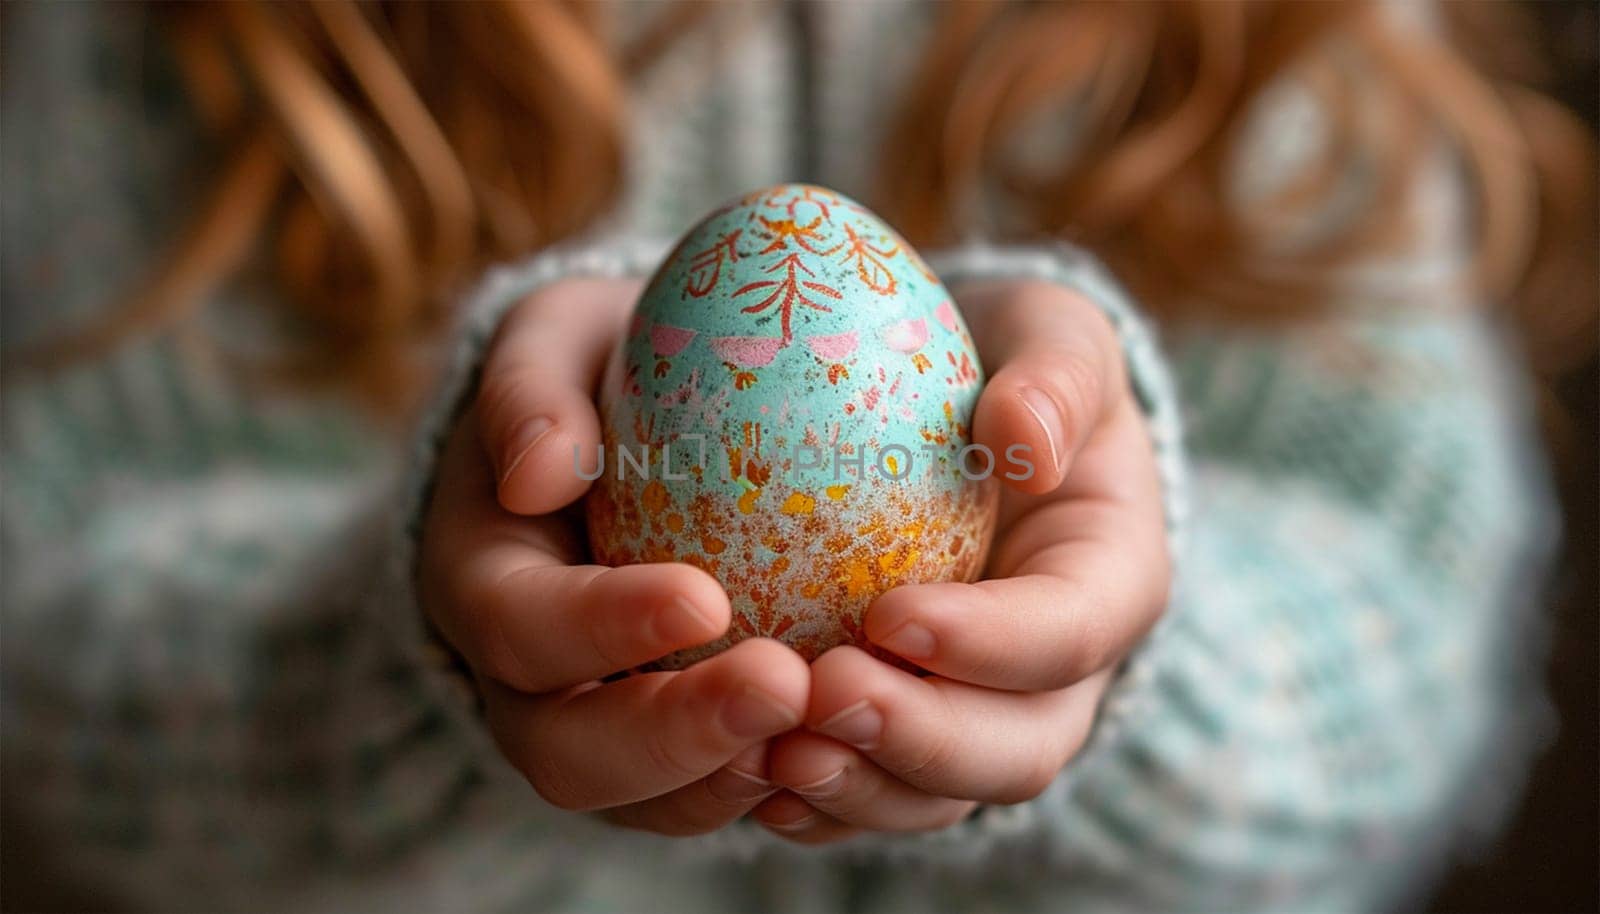 The hands of a little girl holding painted Easter egg front view, Happy Easter Holiday design decorated egg with beautiful colorful details by Annebel146